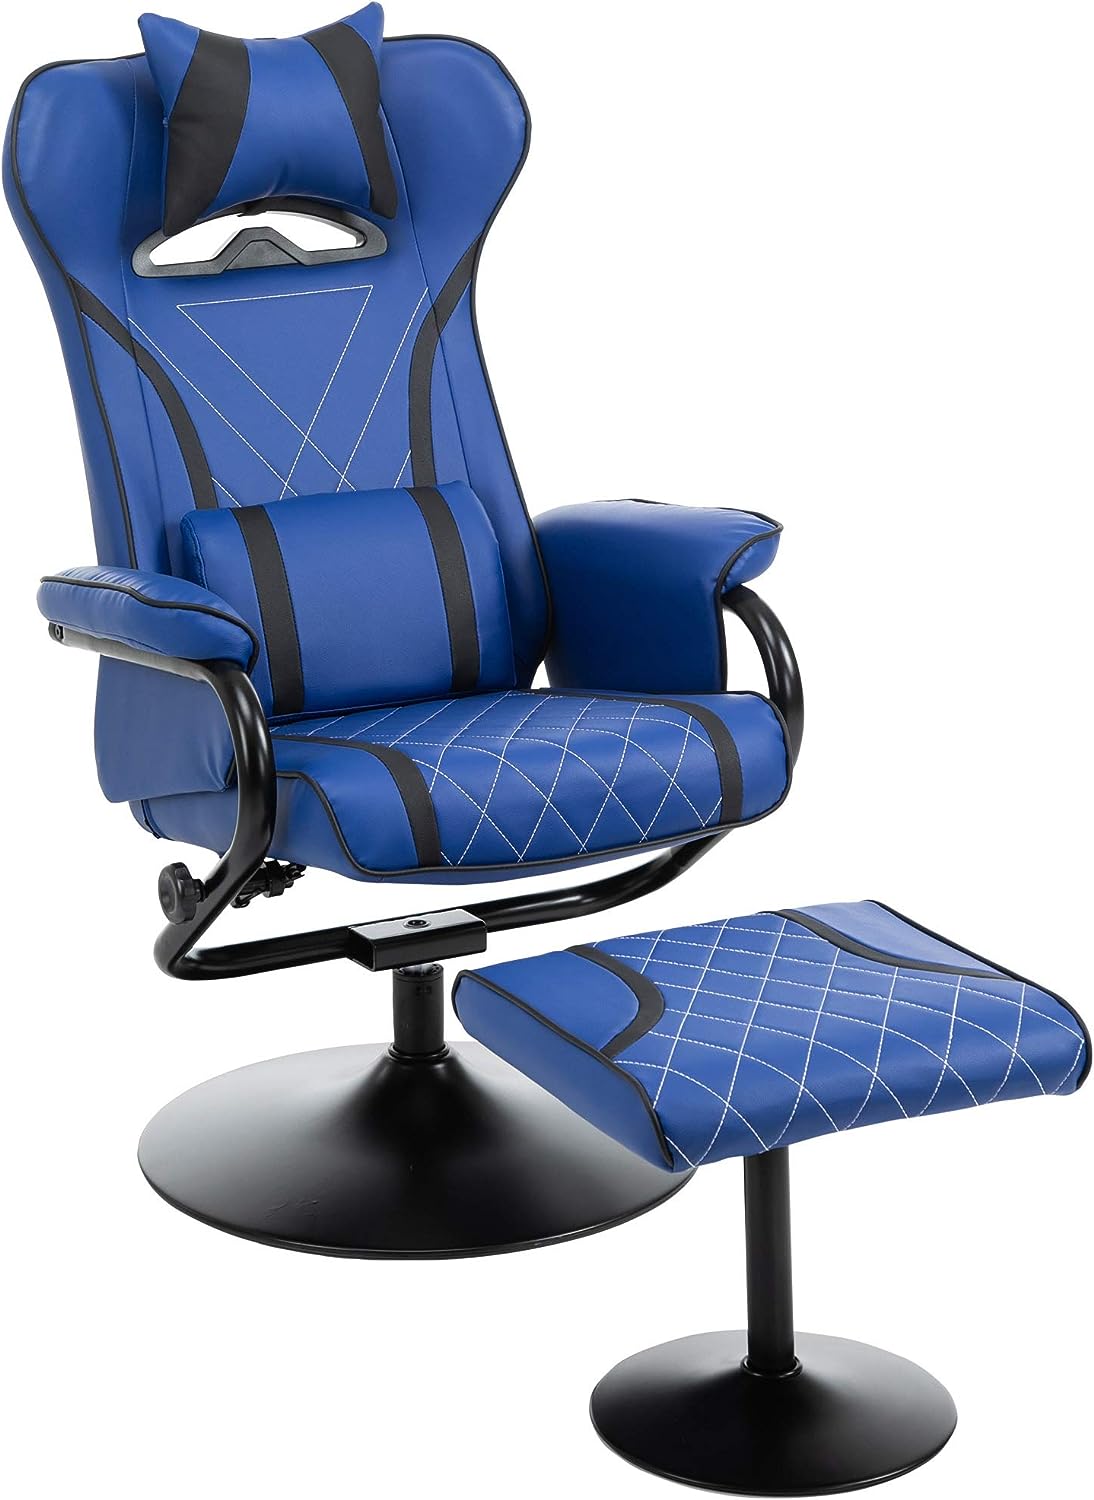 Vinsetto High Back Video Gaming Recliner with Ottoman, [...]